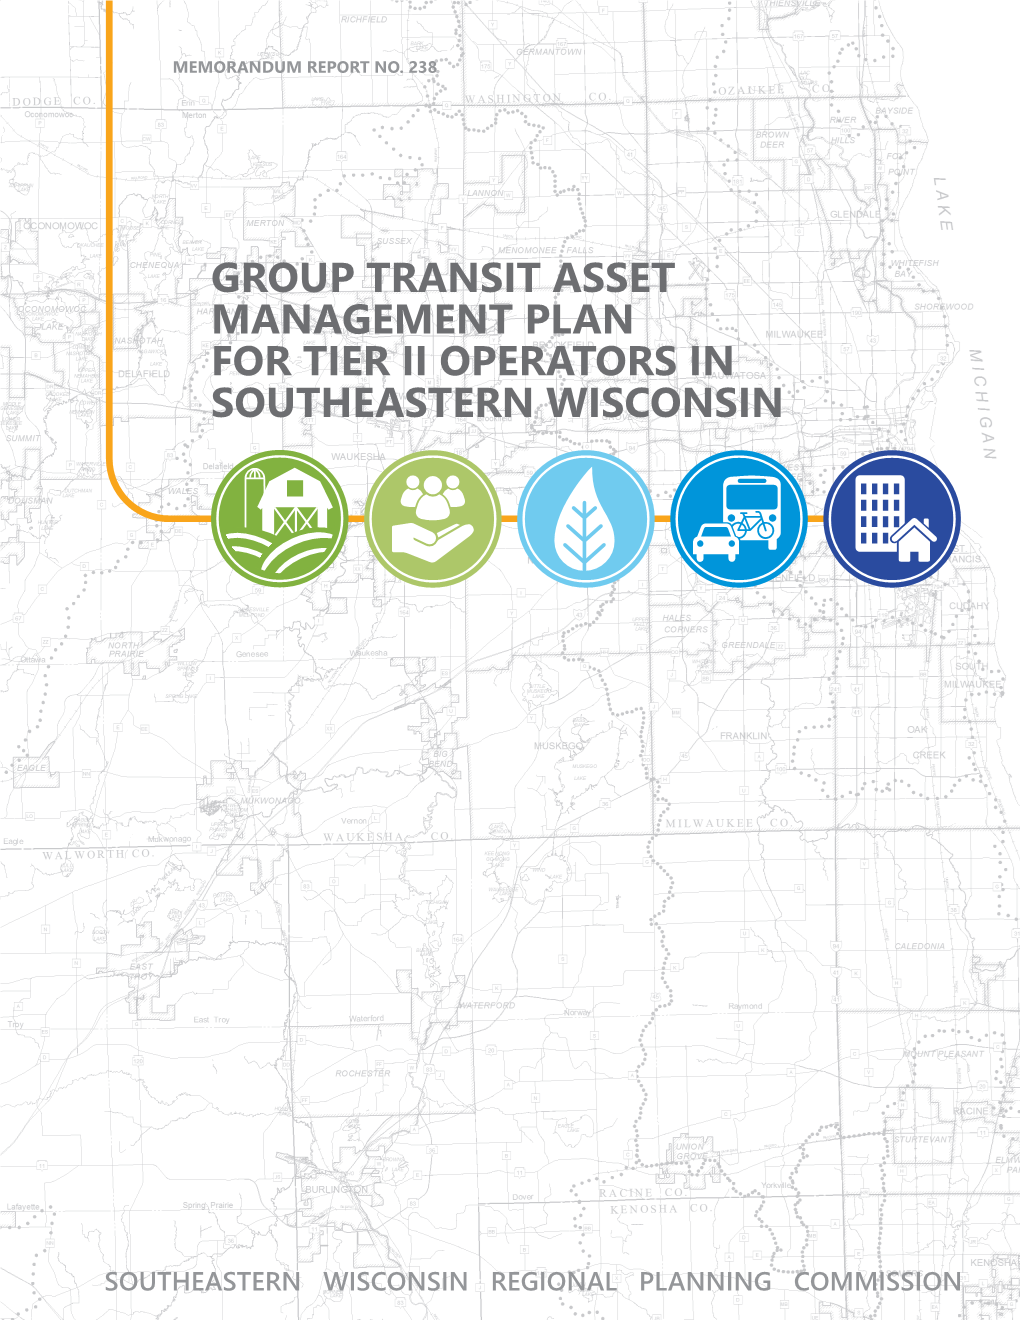 Group Transit Asset Management Plan for Tier Ii Operators in Southeastern Wisconsin